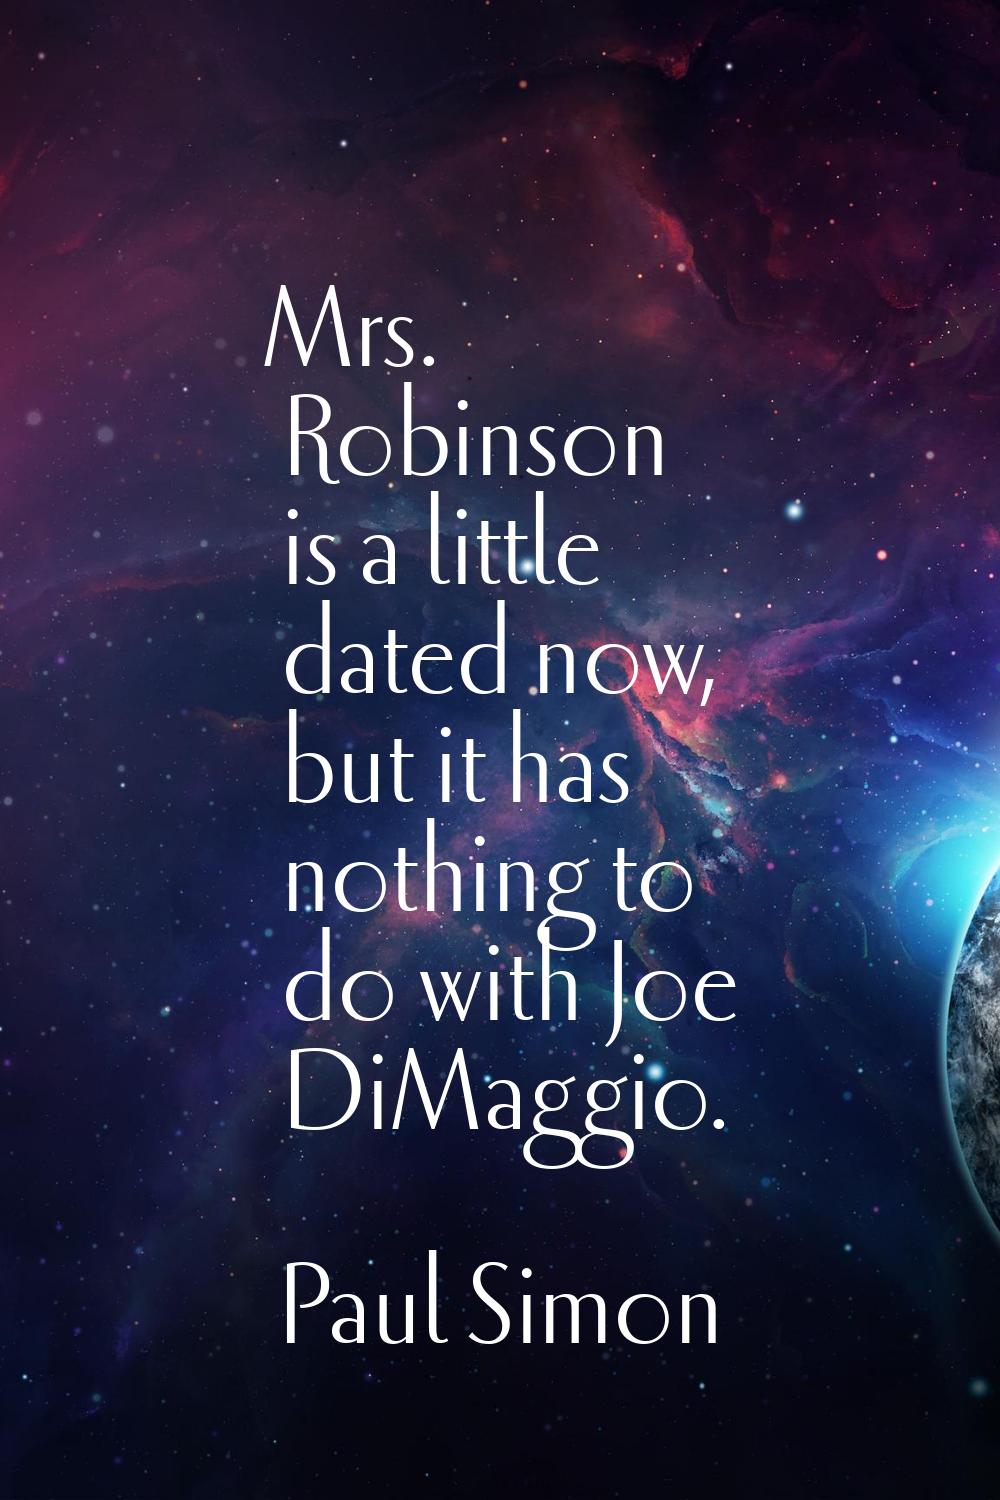 Mrs. Robinson is a little dated now, but it has nothing to do with Joe DiMaggio.